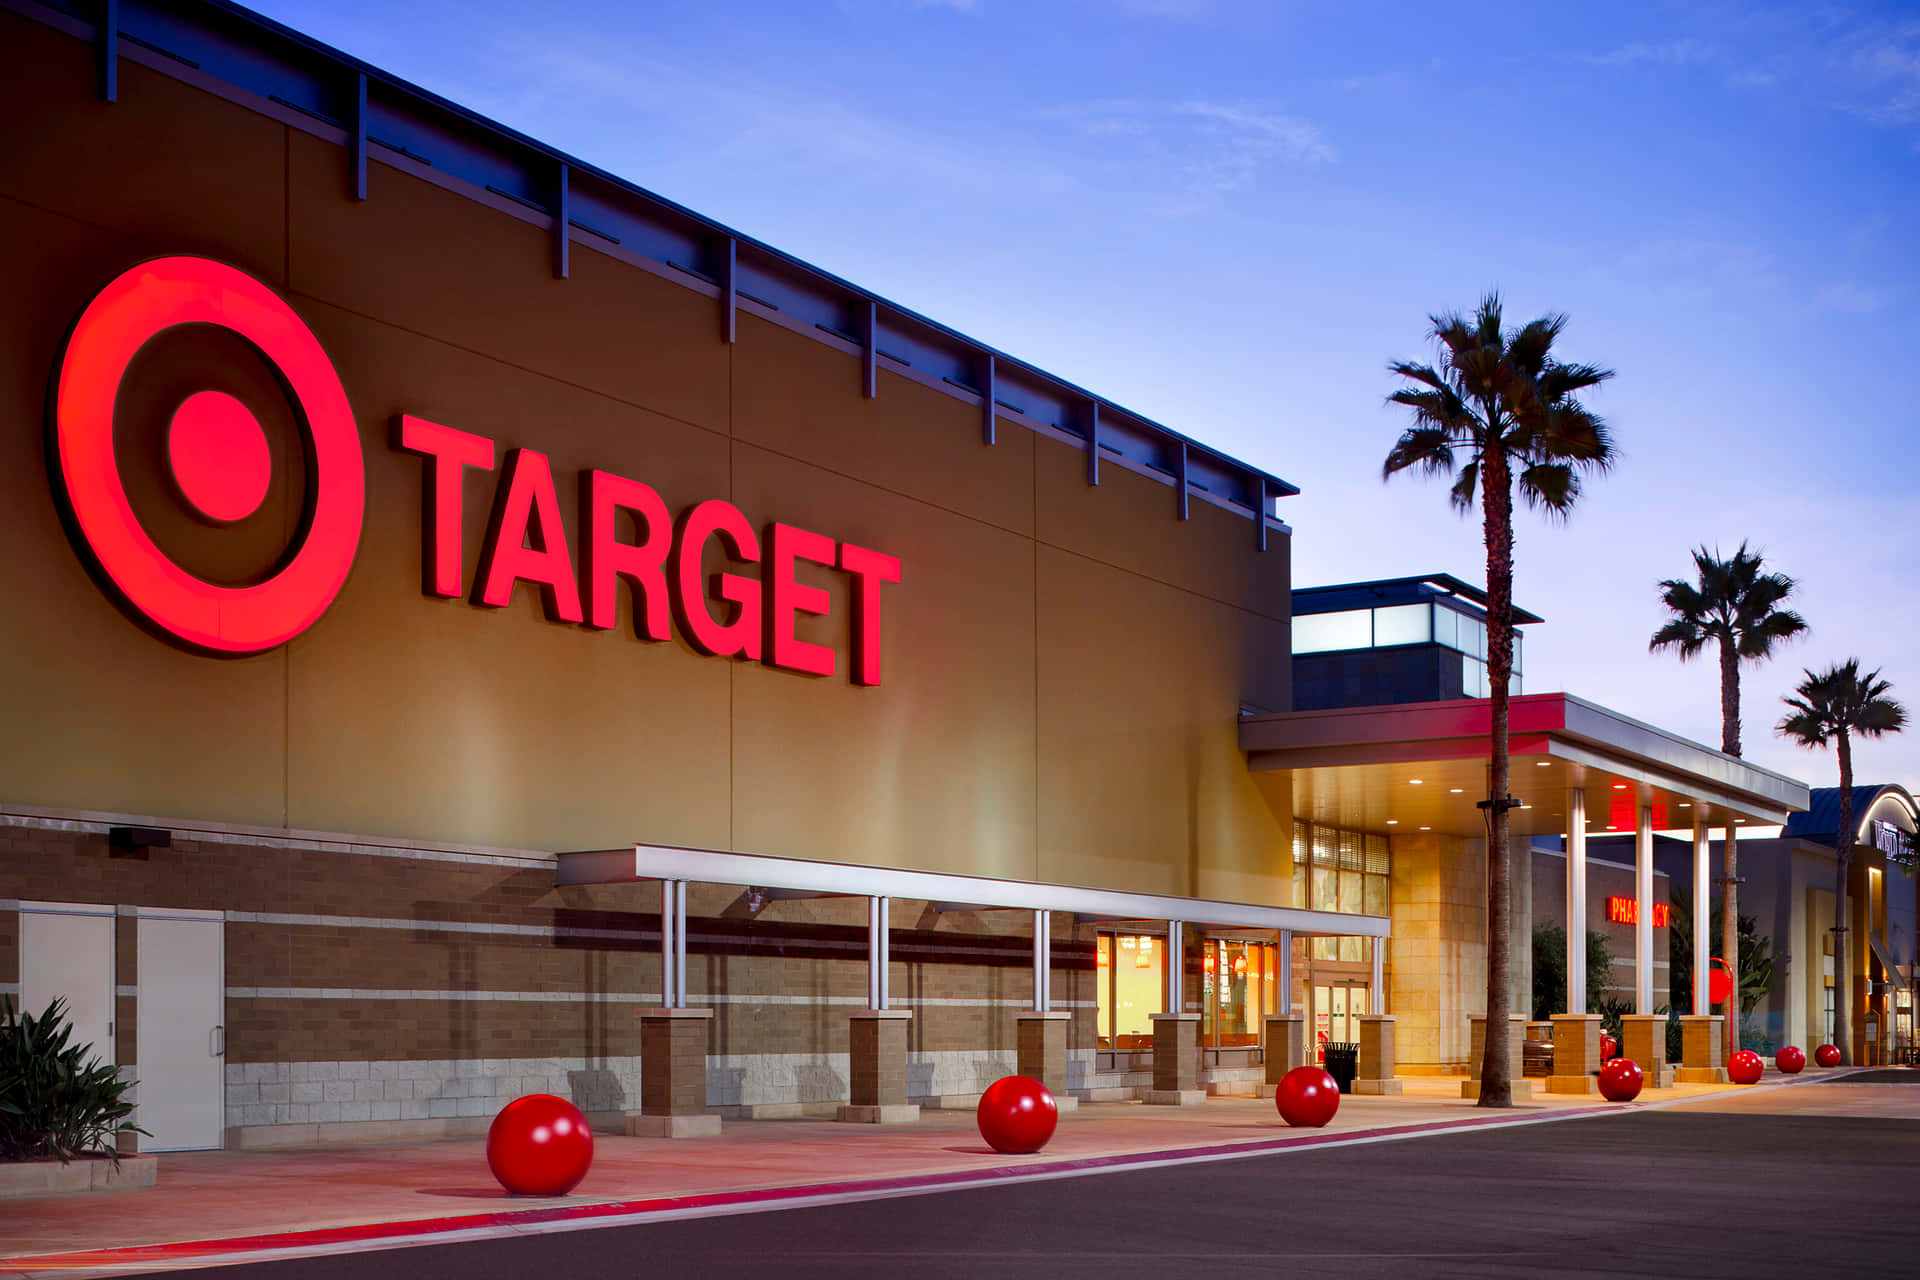 "Get great deals on everything from groceries to furniture and décor when you shop at Target."